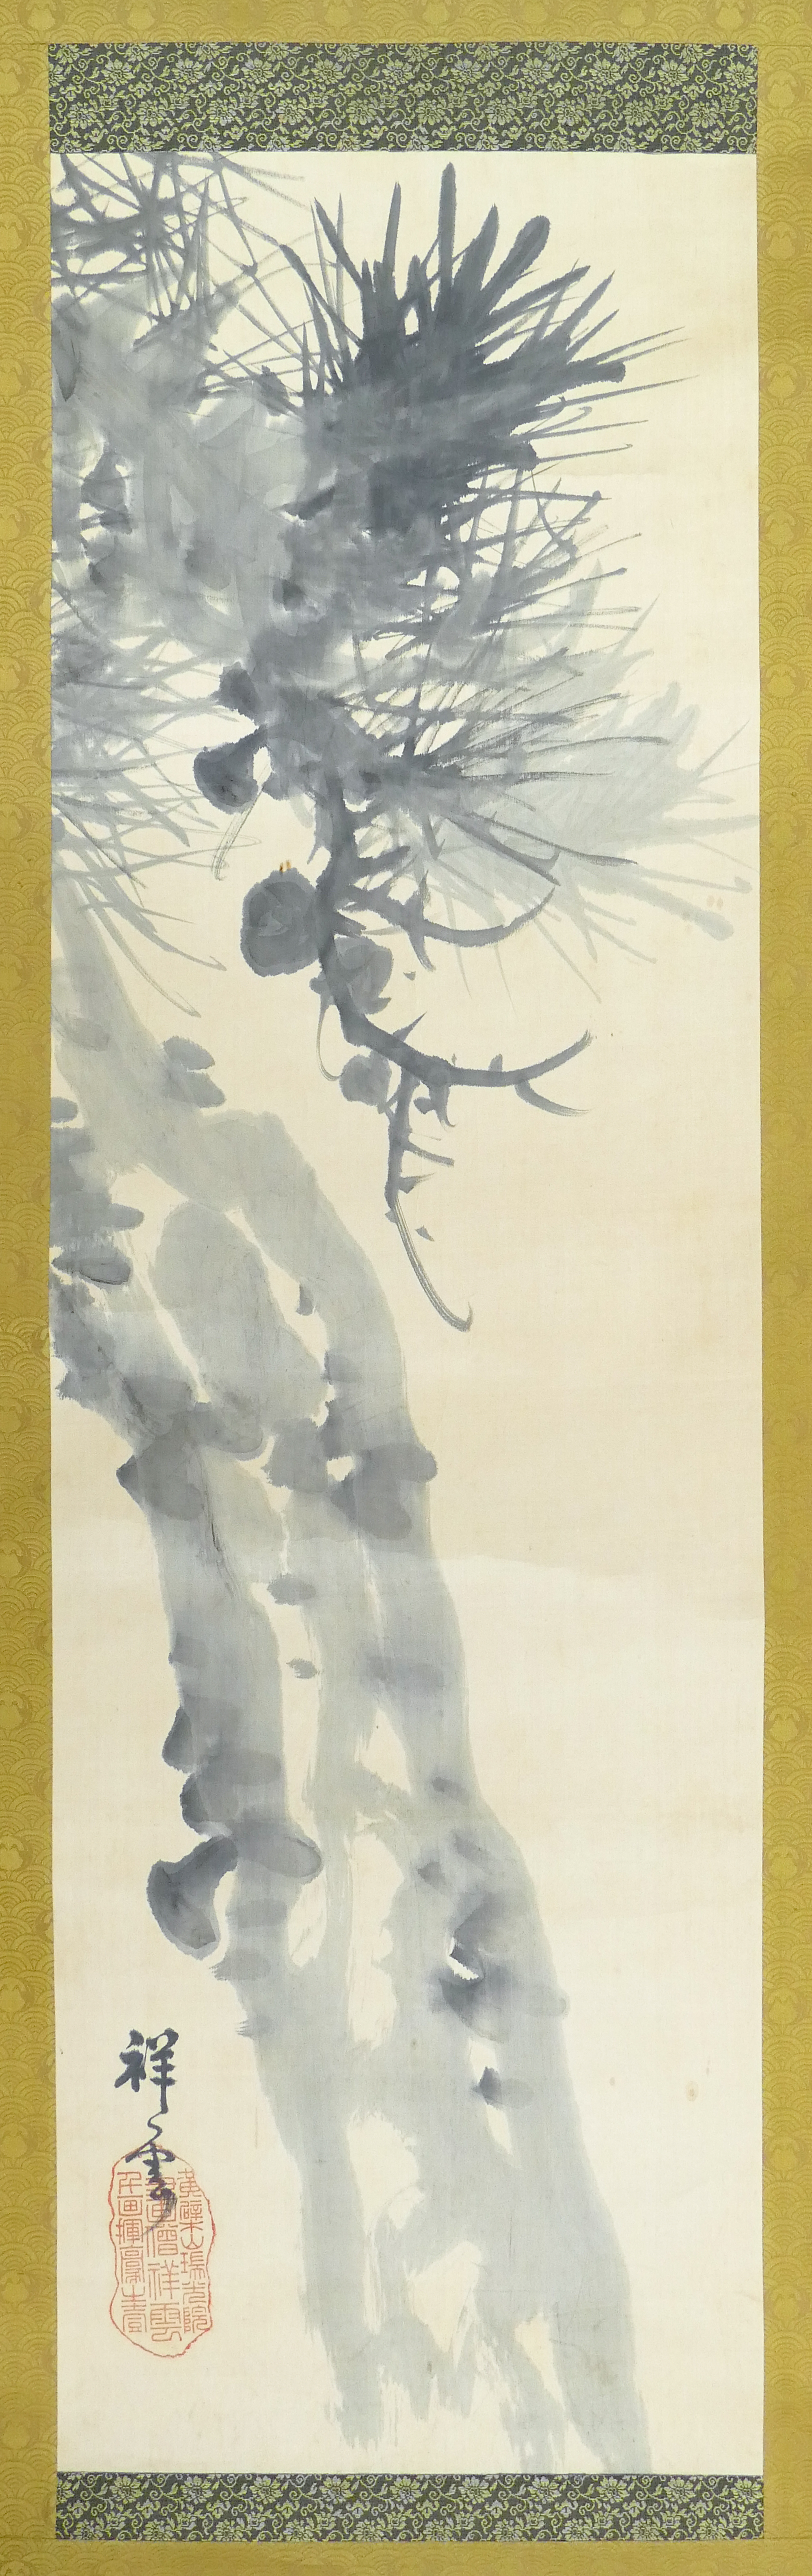 Chinese Tree Scroll Painting Image 3cfb83